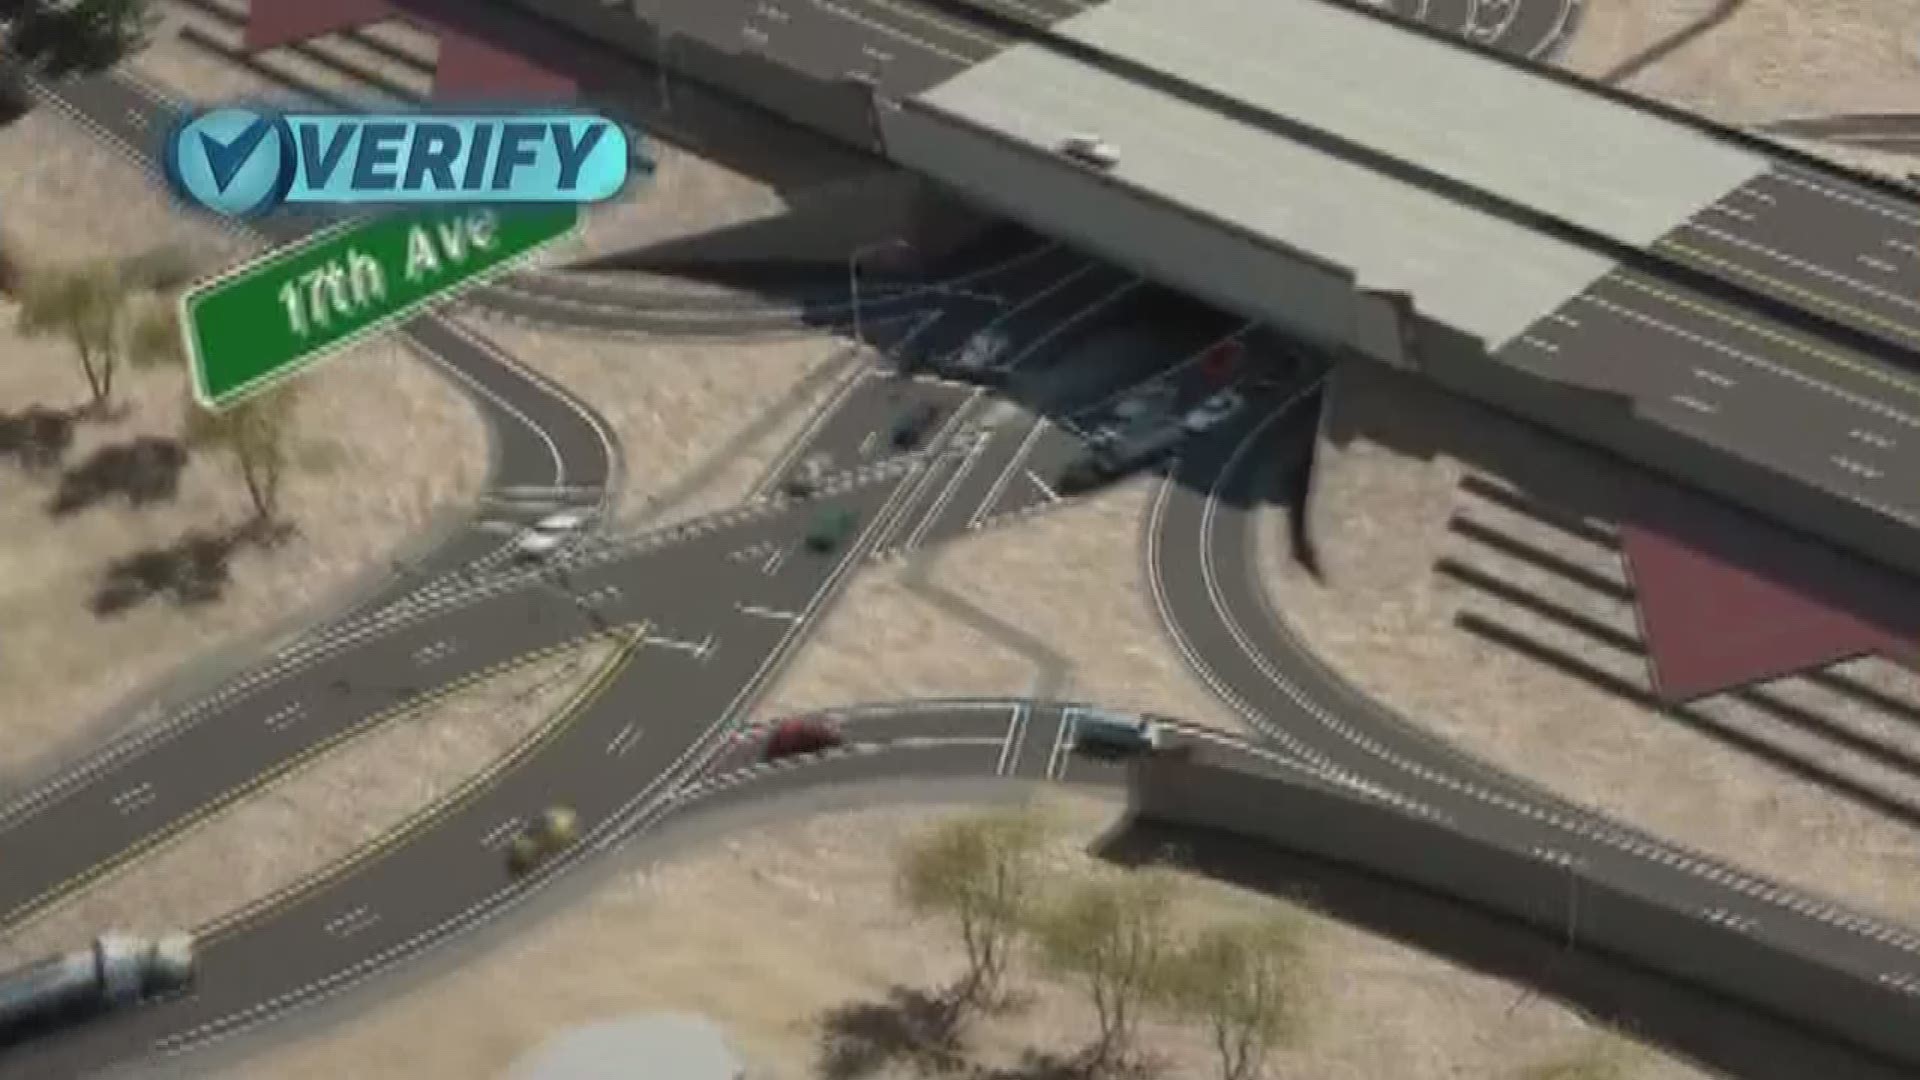 Buckle up! Diverging diamond intersections are coming to a highway near you.